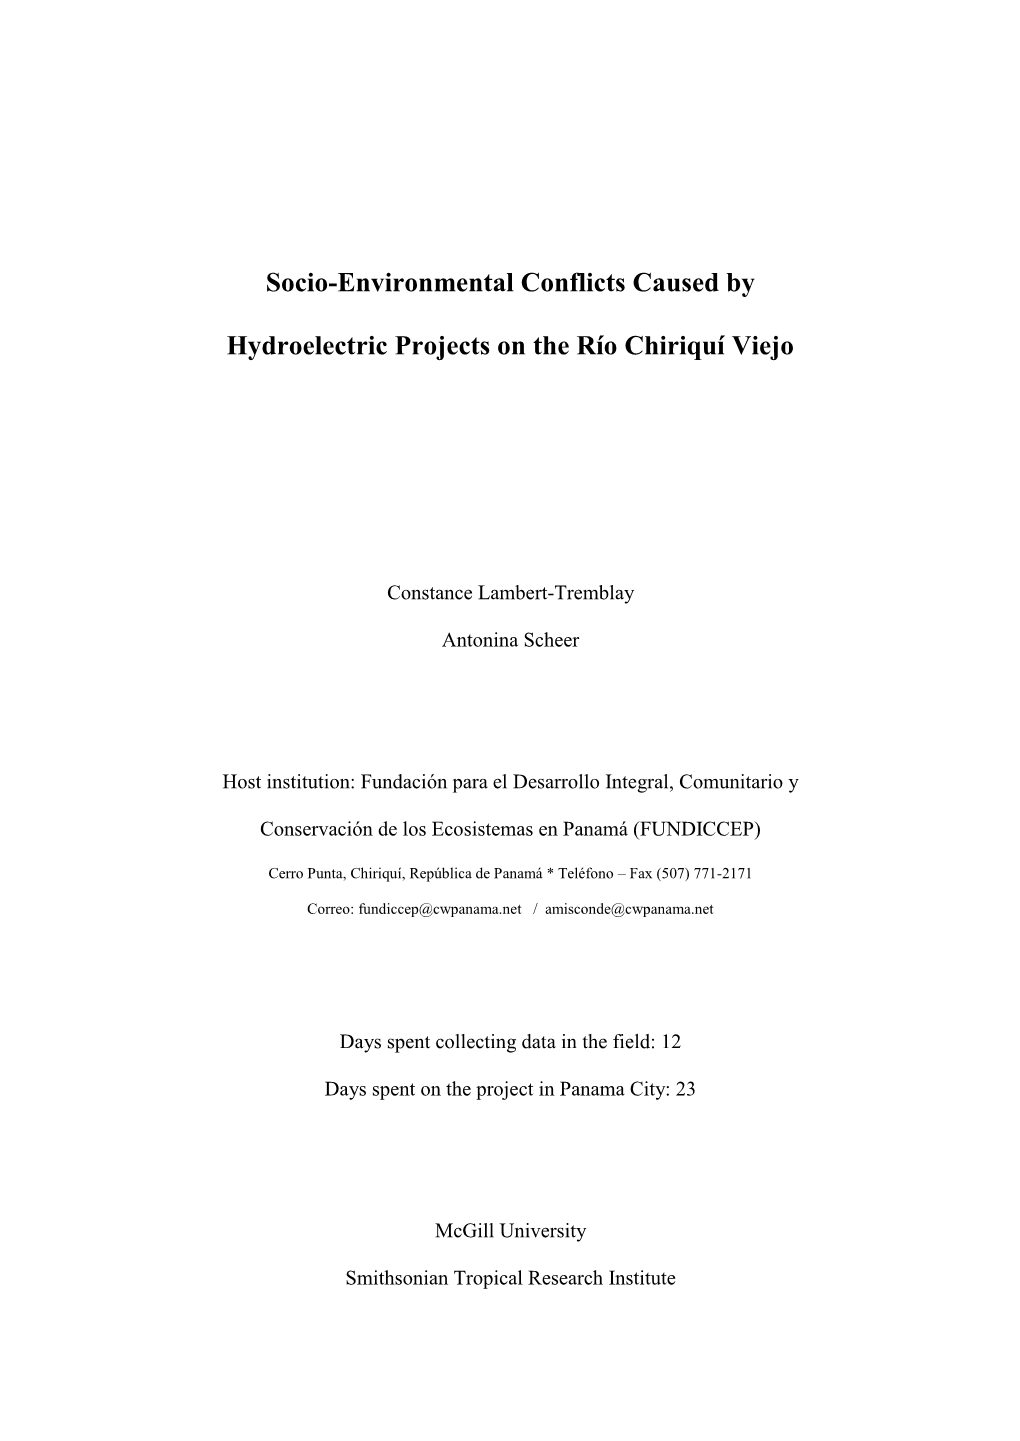 Socio-Environmental Conflicts Caused by Hydroelectric Projects